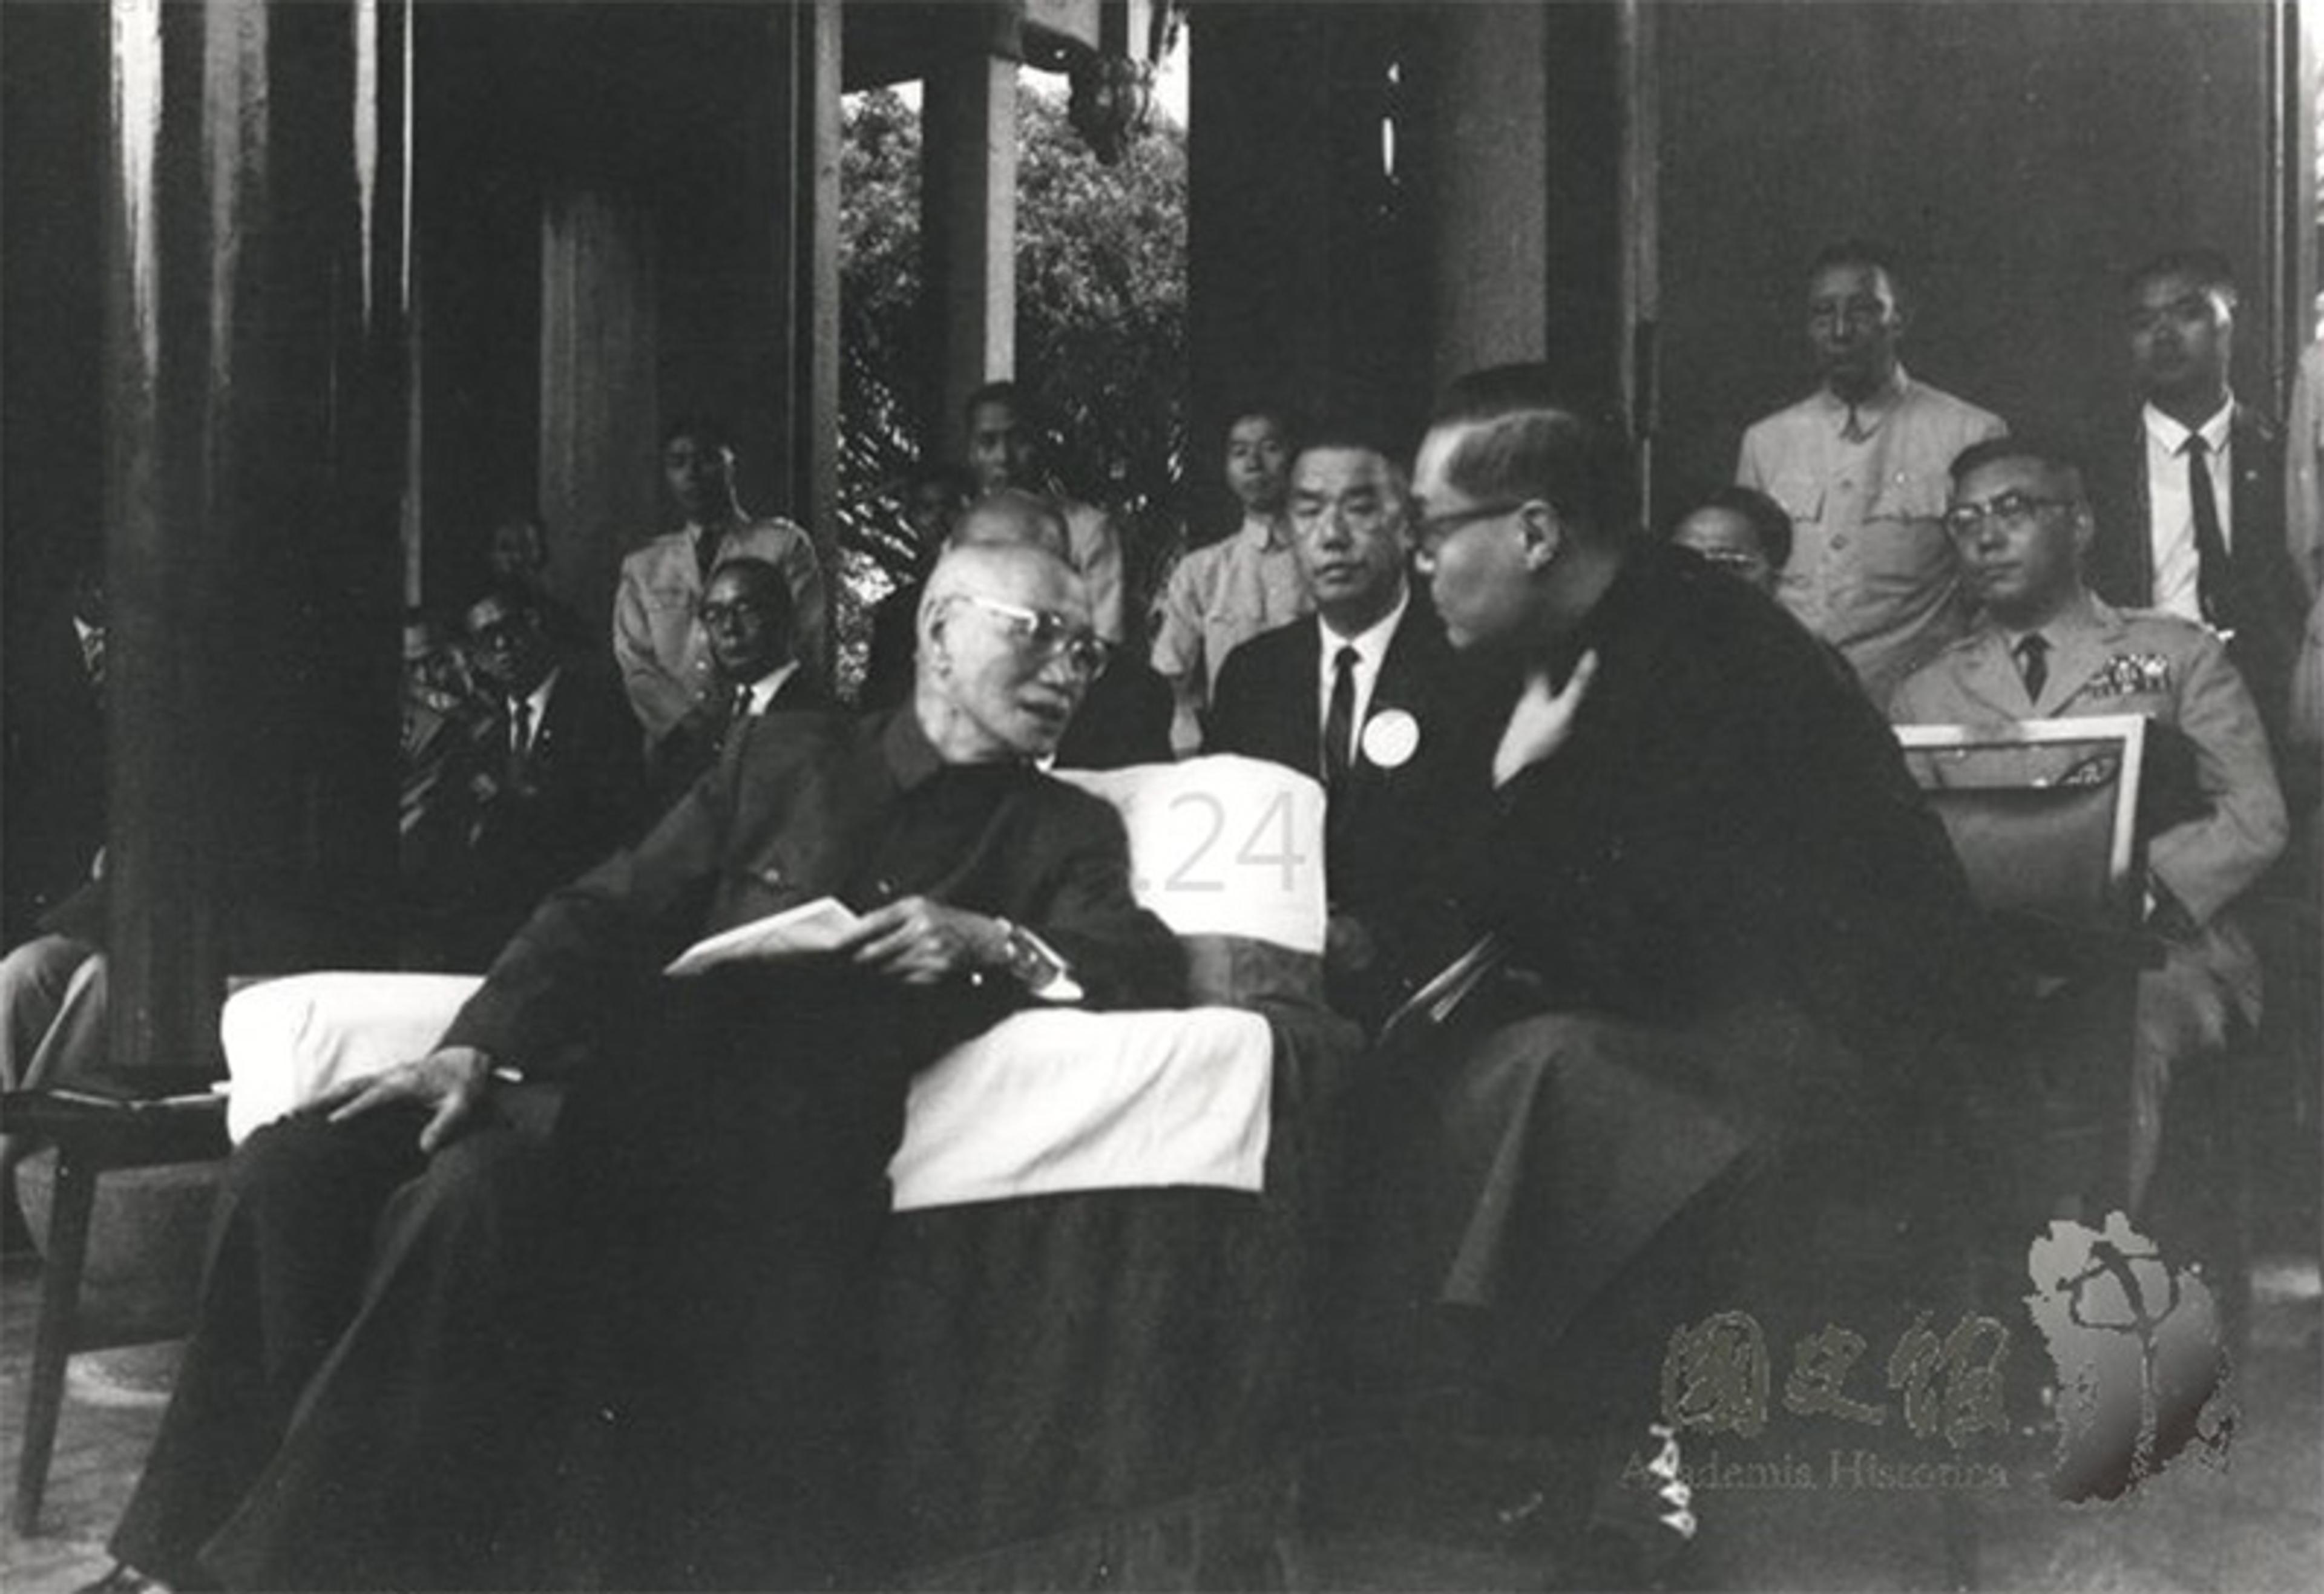 A black and white photo showing a group of men in a formal setting. In the foreground, one seated man is leaning forward, engaged in conversation with another. Other attendees in suits or uniforms can be seen standing in the background.